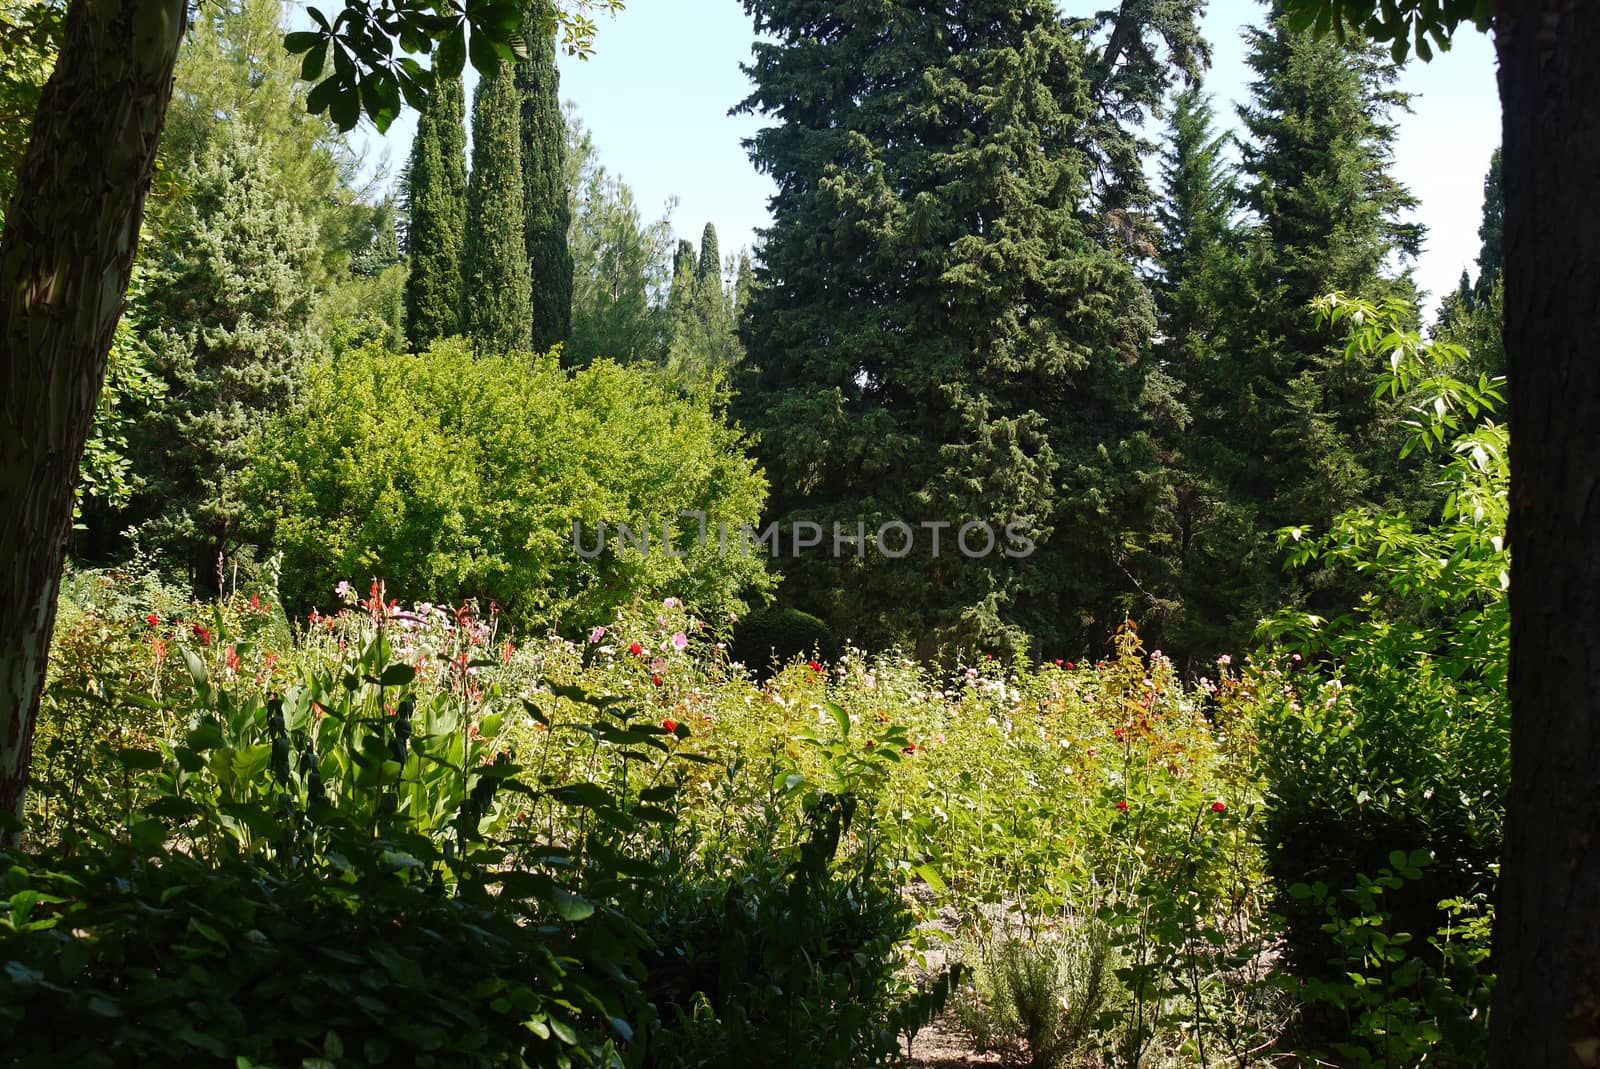 A beautiful flowerbed with high flowers growing in a park among green bushes and lush trees under the rays of a hot summer sun.